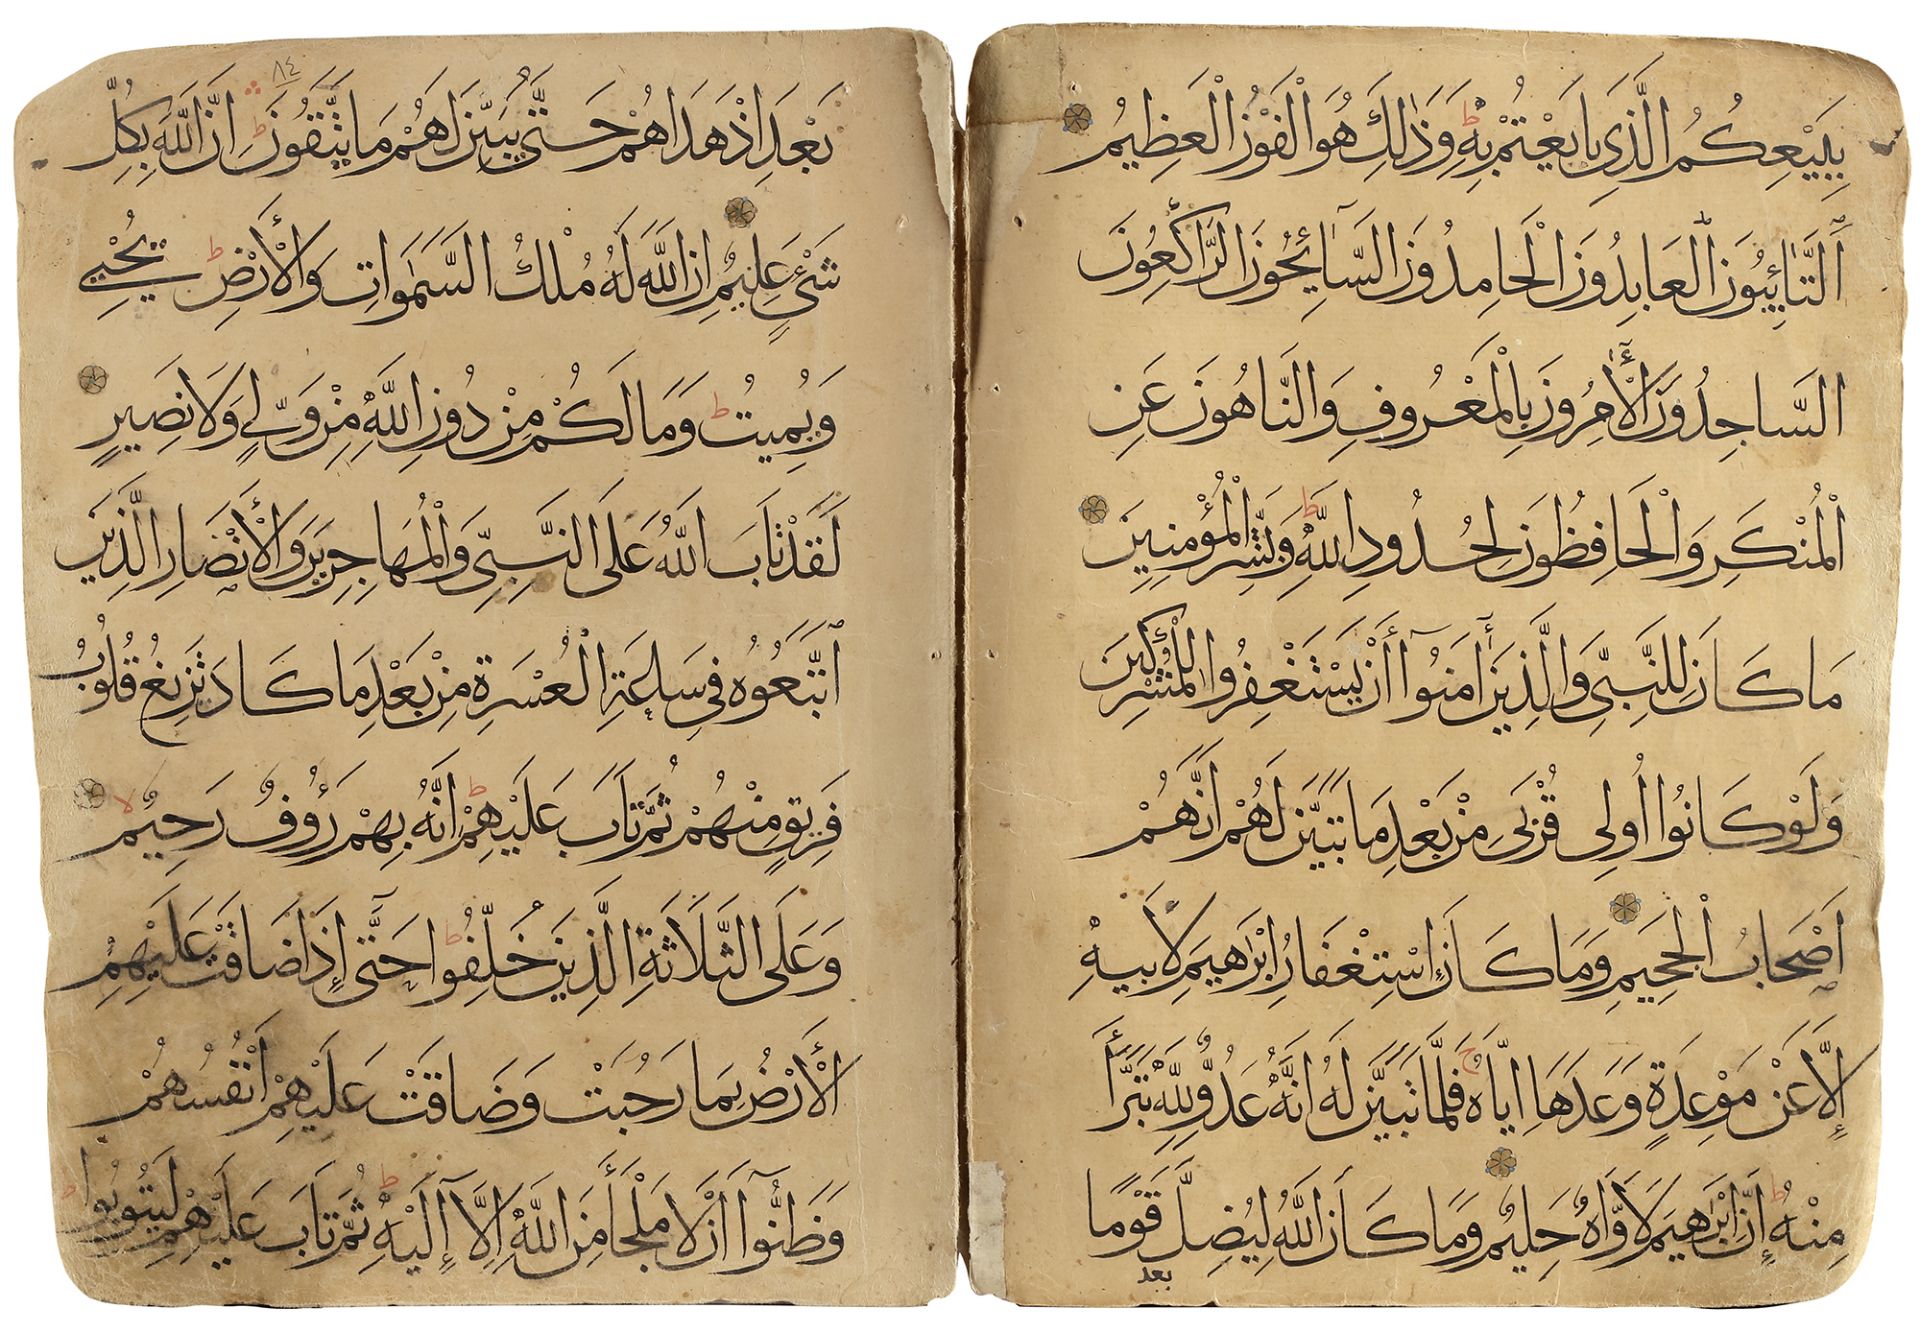 THREE MAMLUK QURAN PAGES, EGYPT OR SYRIA, 13TH-14TH CENTURY - Image 2 of 4